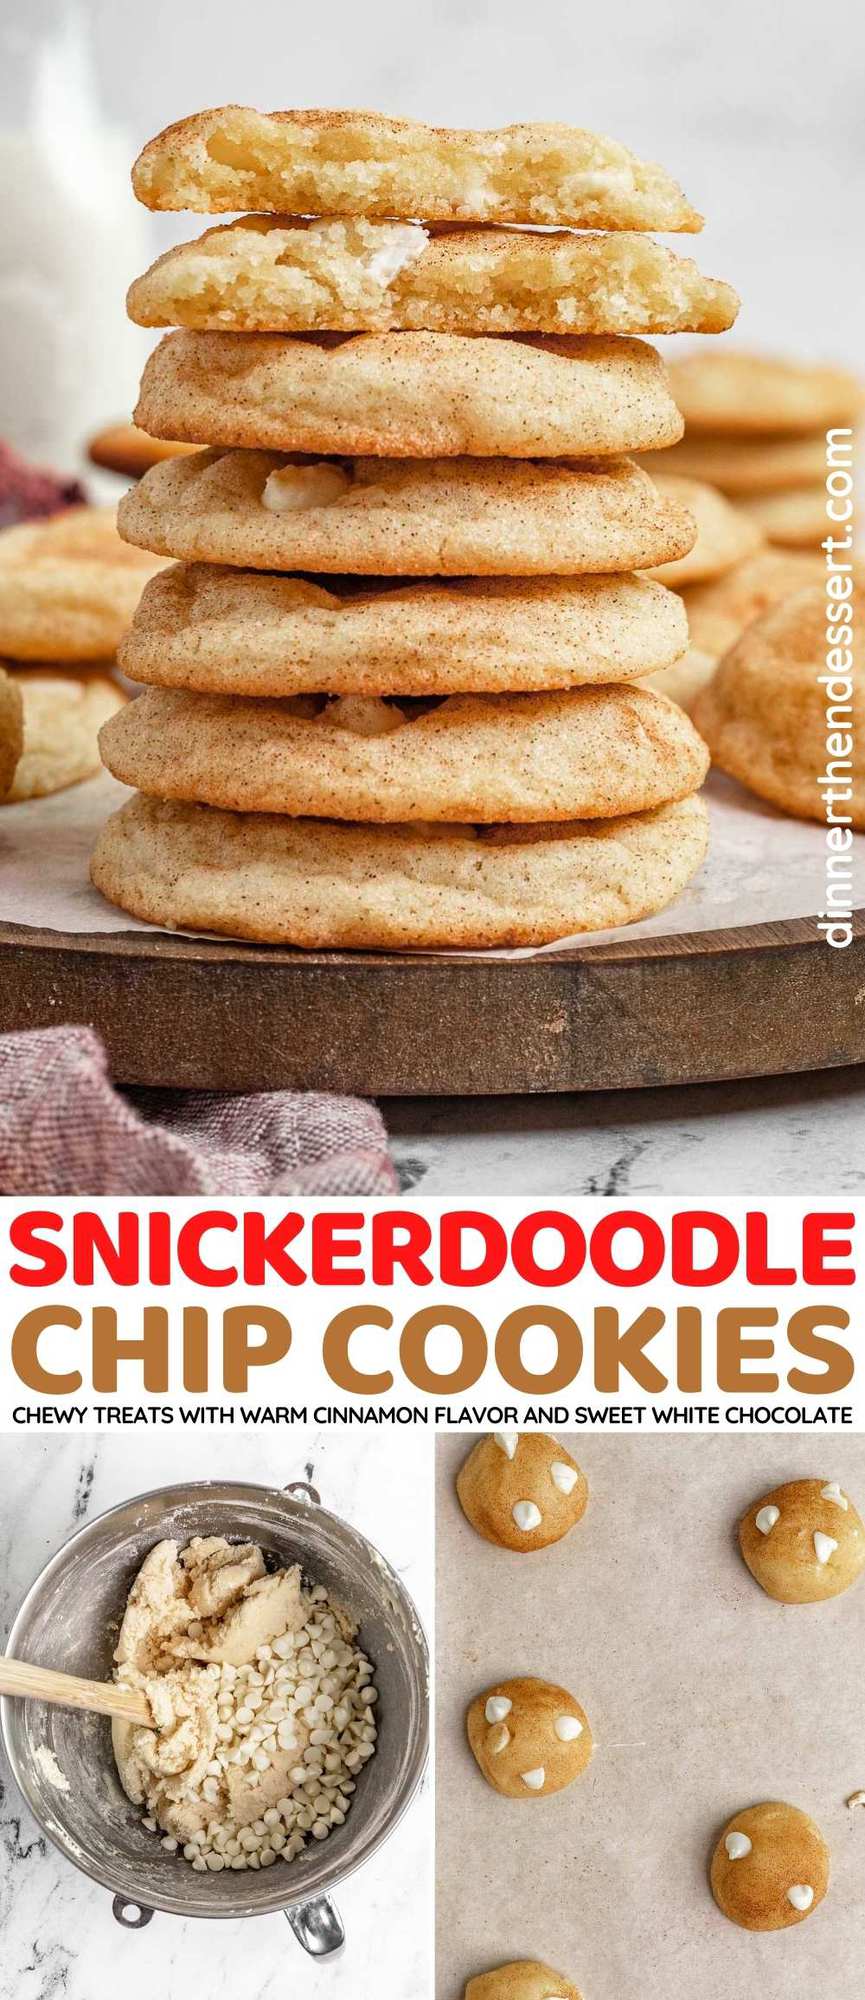 Snickerdoodle Chip Cookies collage